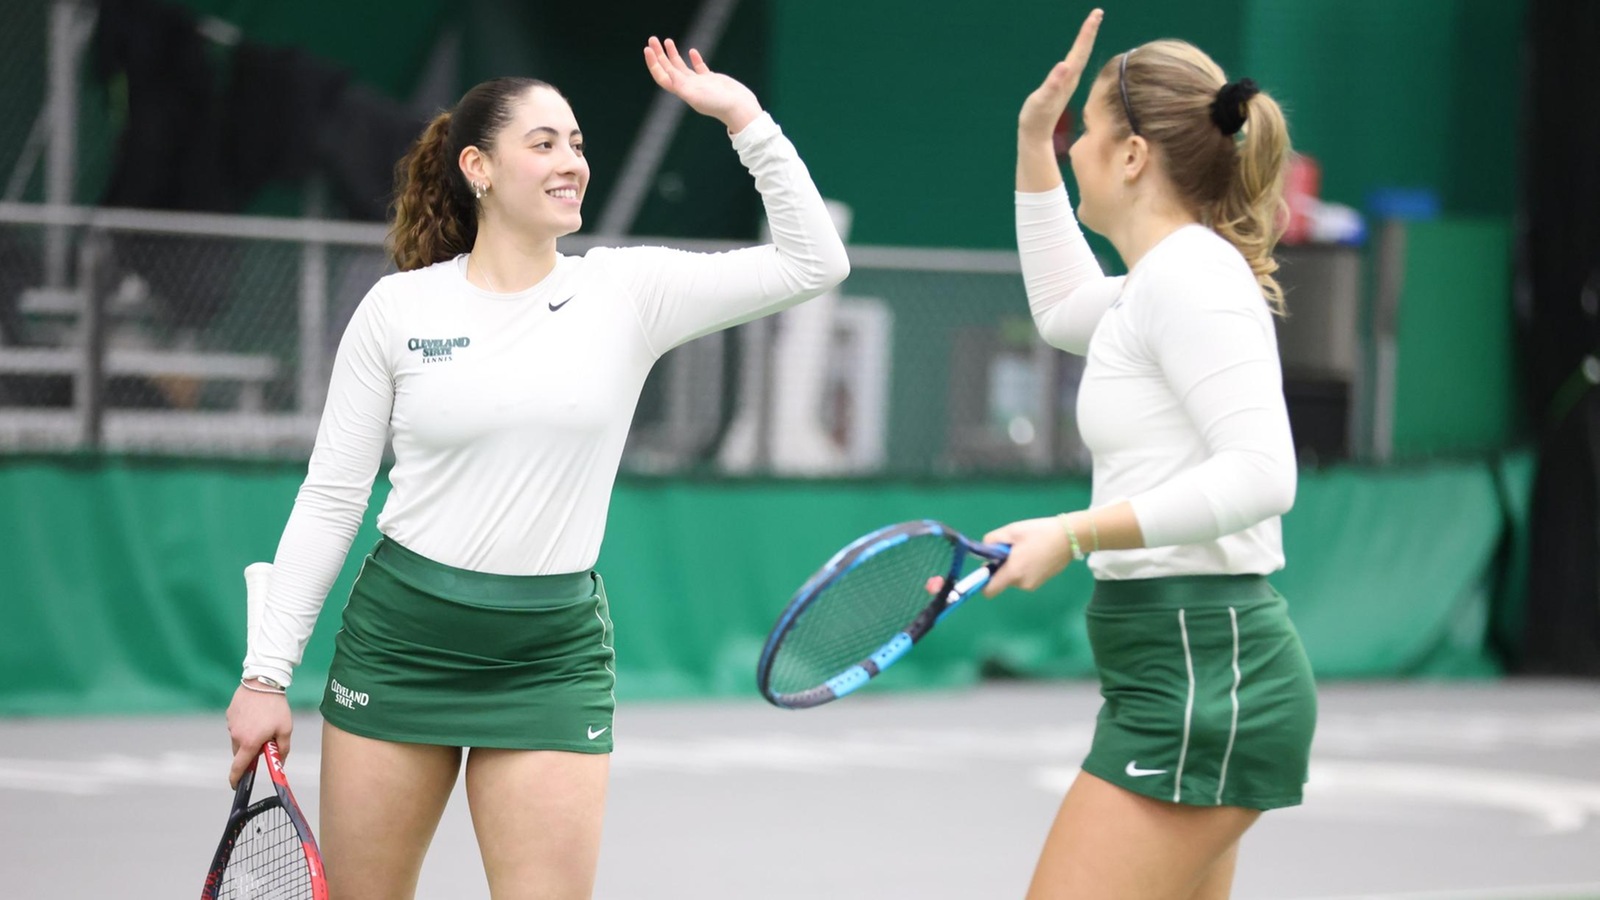 Cleveland State Women&rsquo;s Tennis Sweeps #HLTennis Weekly Awards